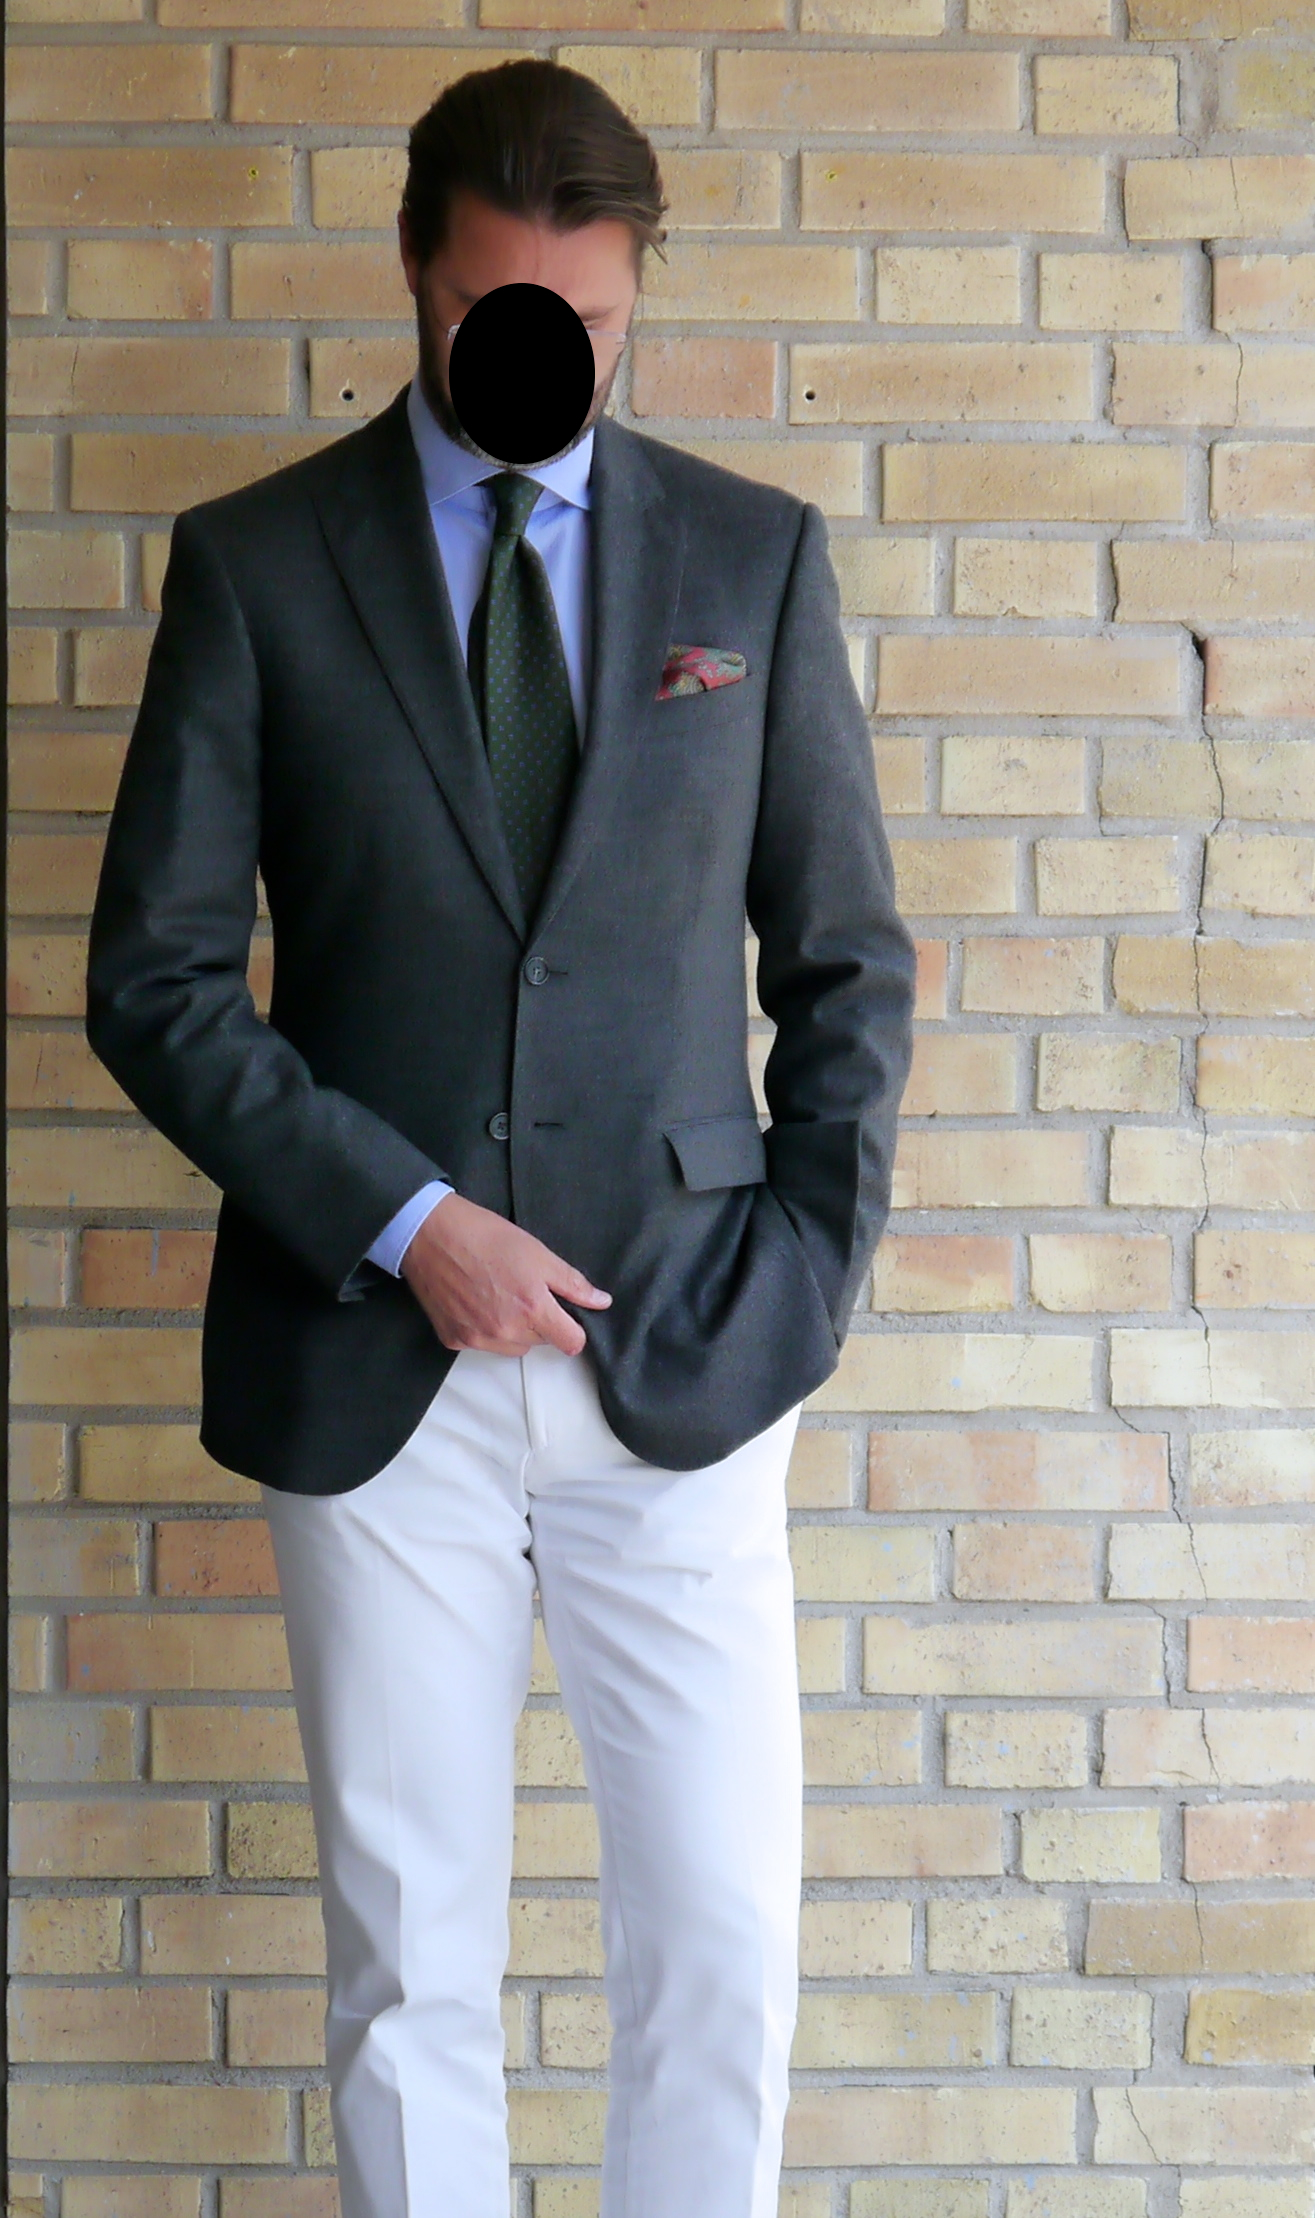 THE GRAY ODD JACKET (AND SOMETIMES MONOCHROMATIC COMBINATION) | Page 2 ...